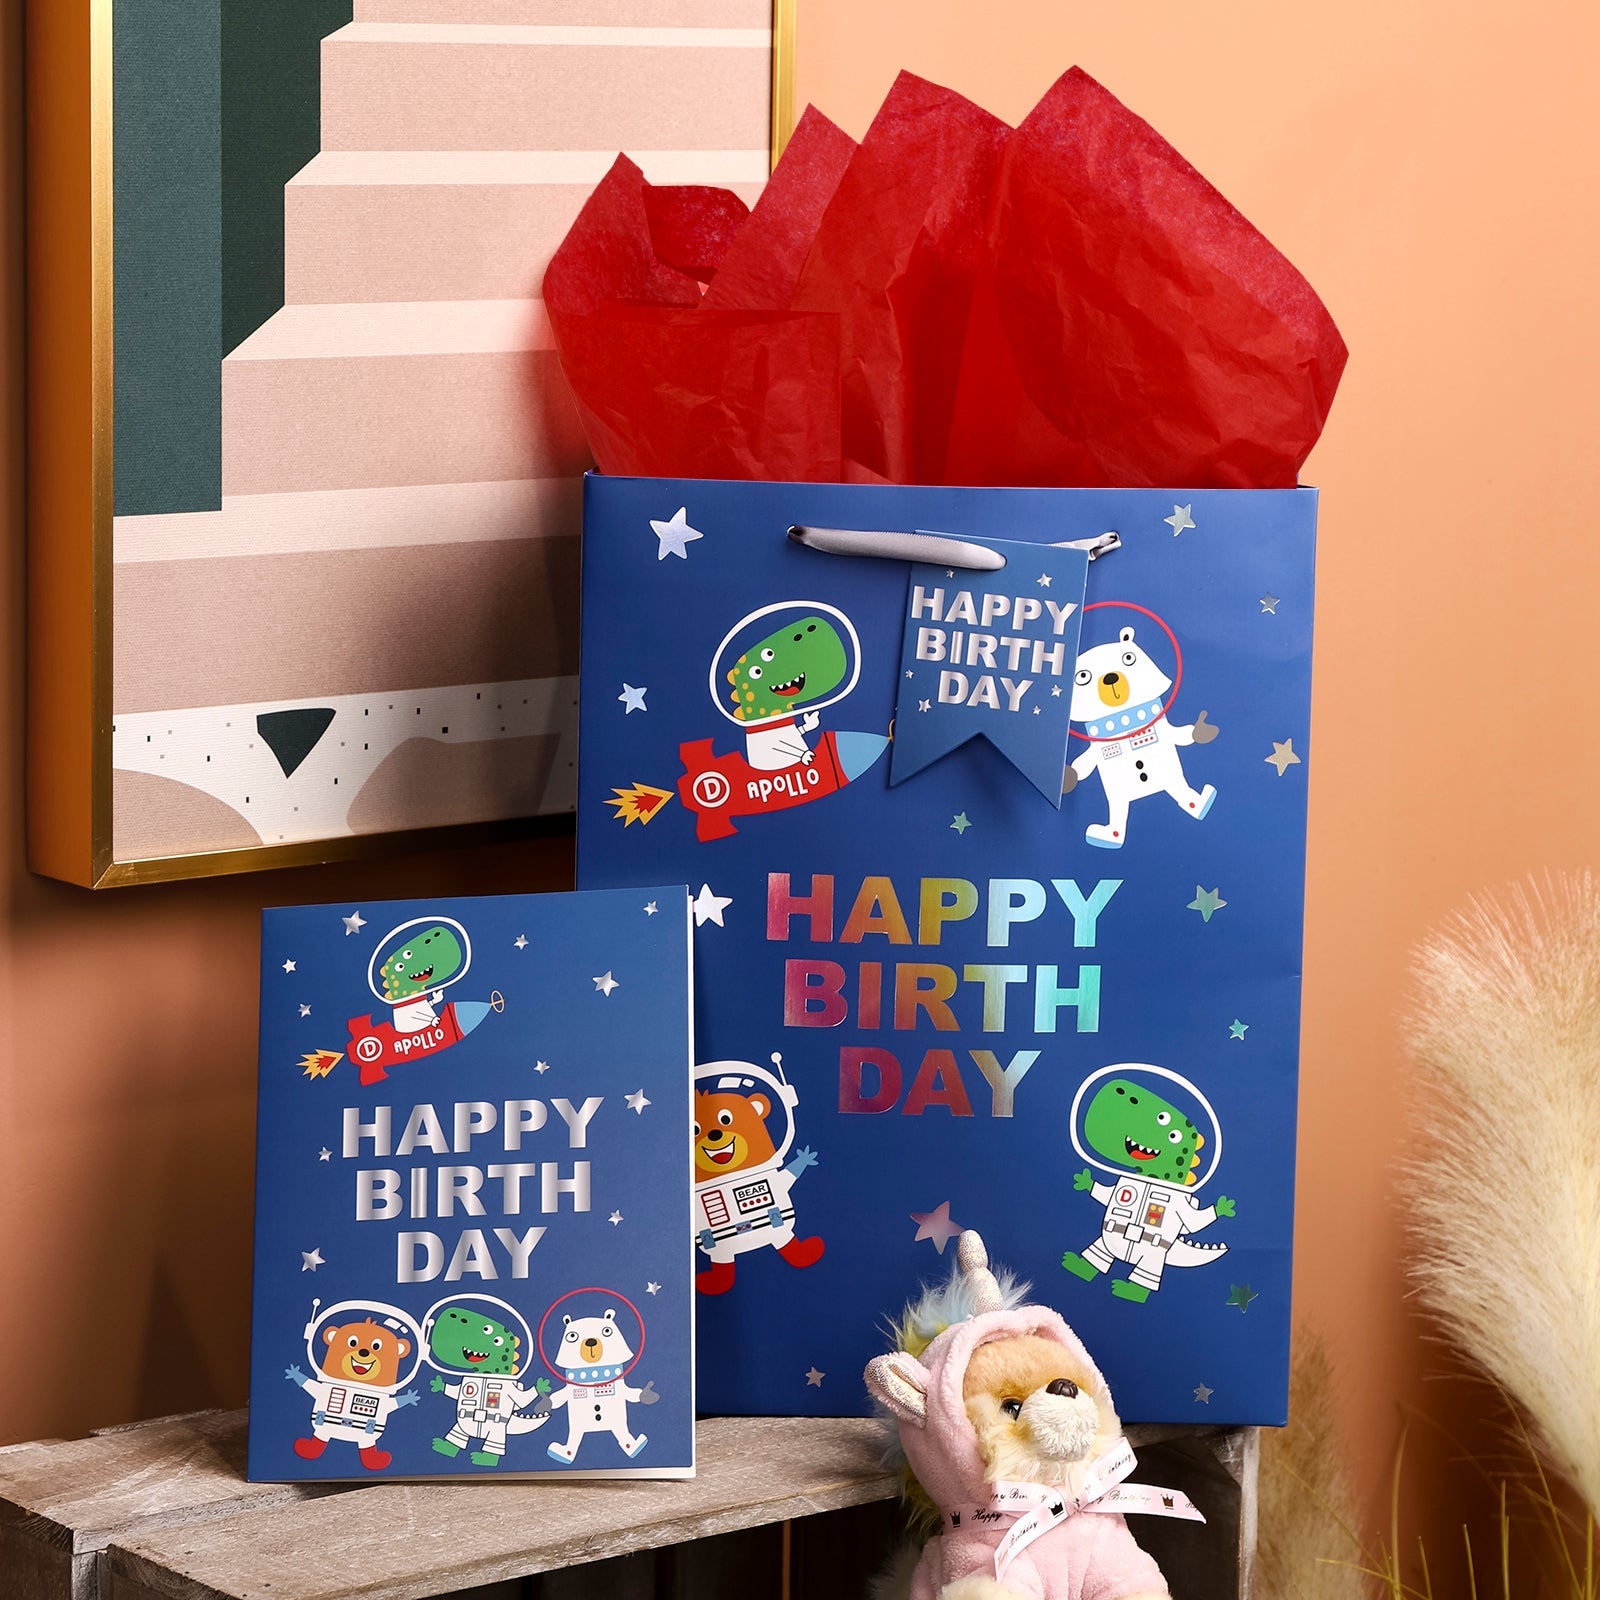 13 inch Large Gift Bag with Birthday Card  & Tissue Paper for Boy - Dinosaur Astronaut Design for Boys